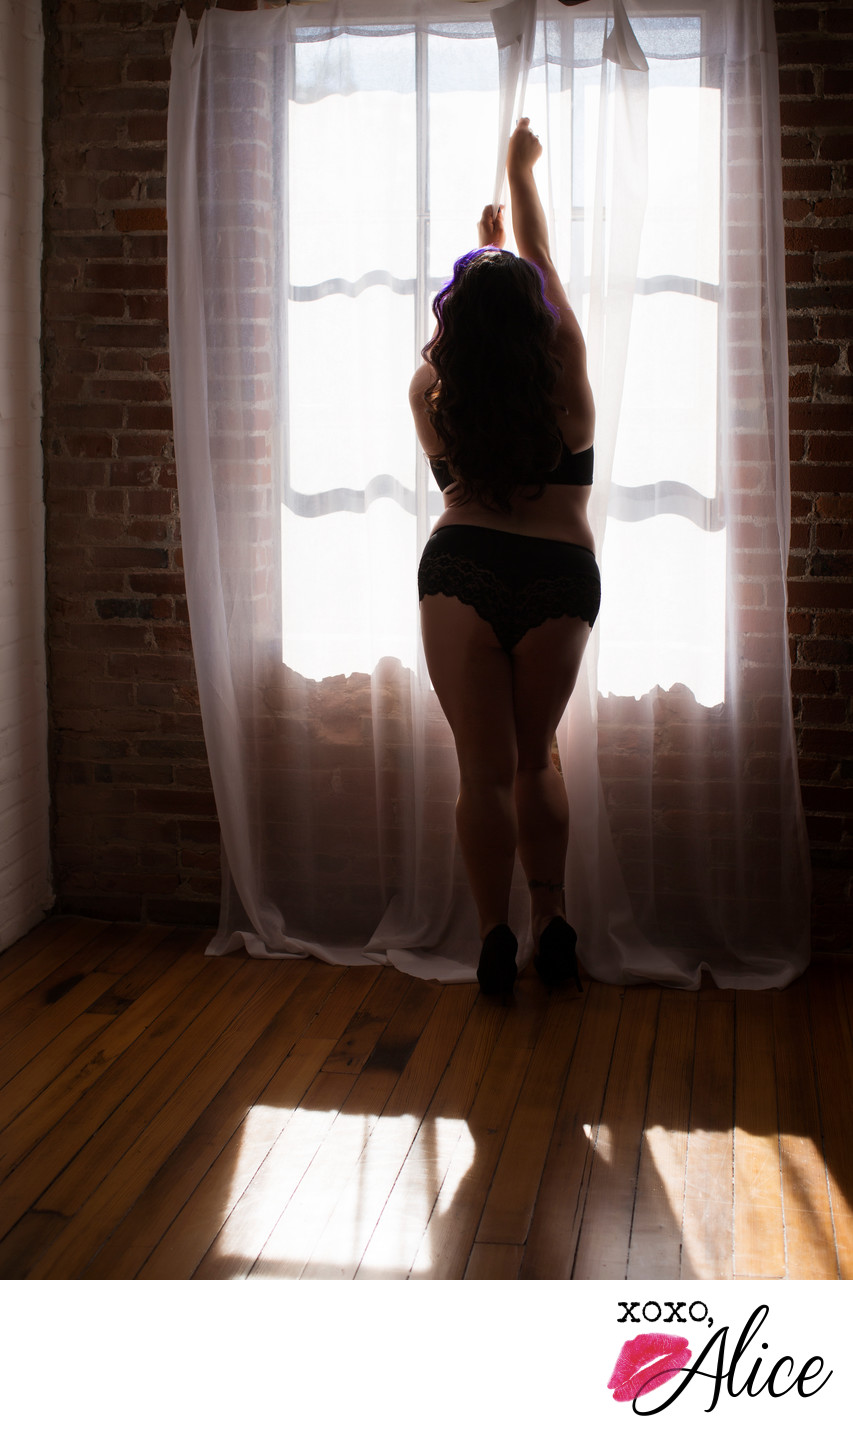 Sexy silhouette boudoir photography with a window